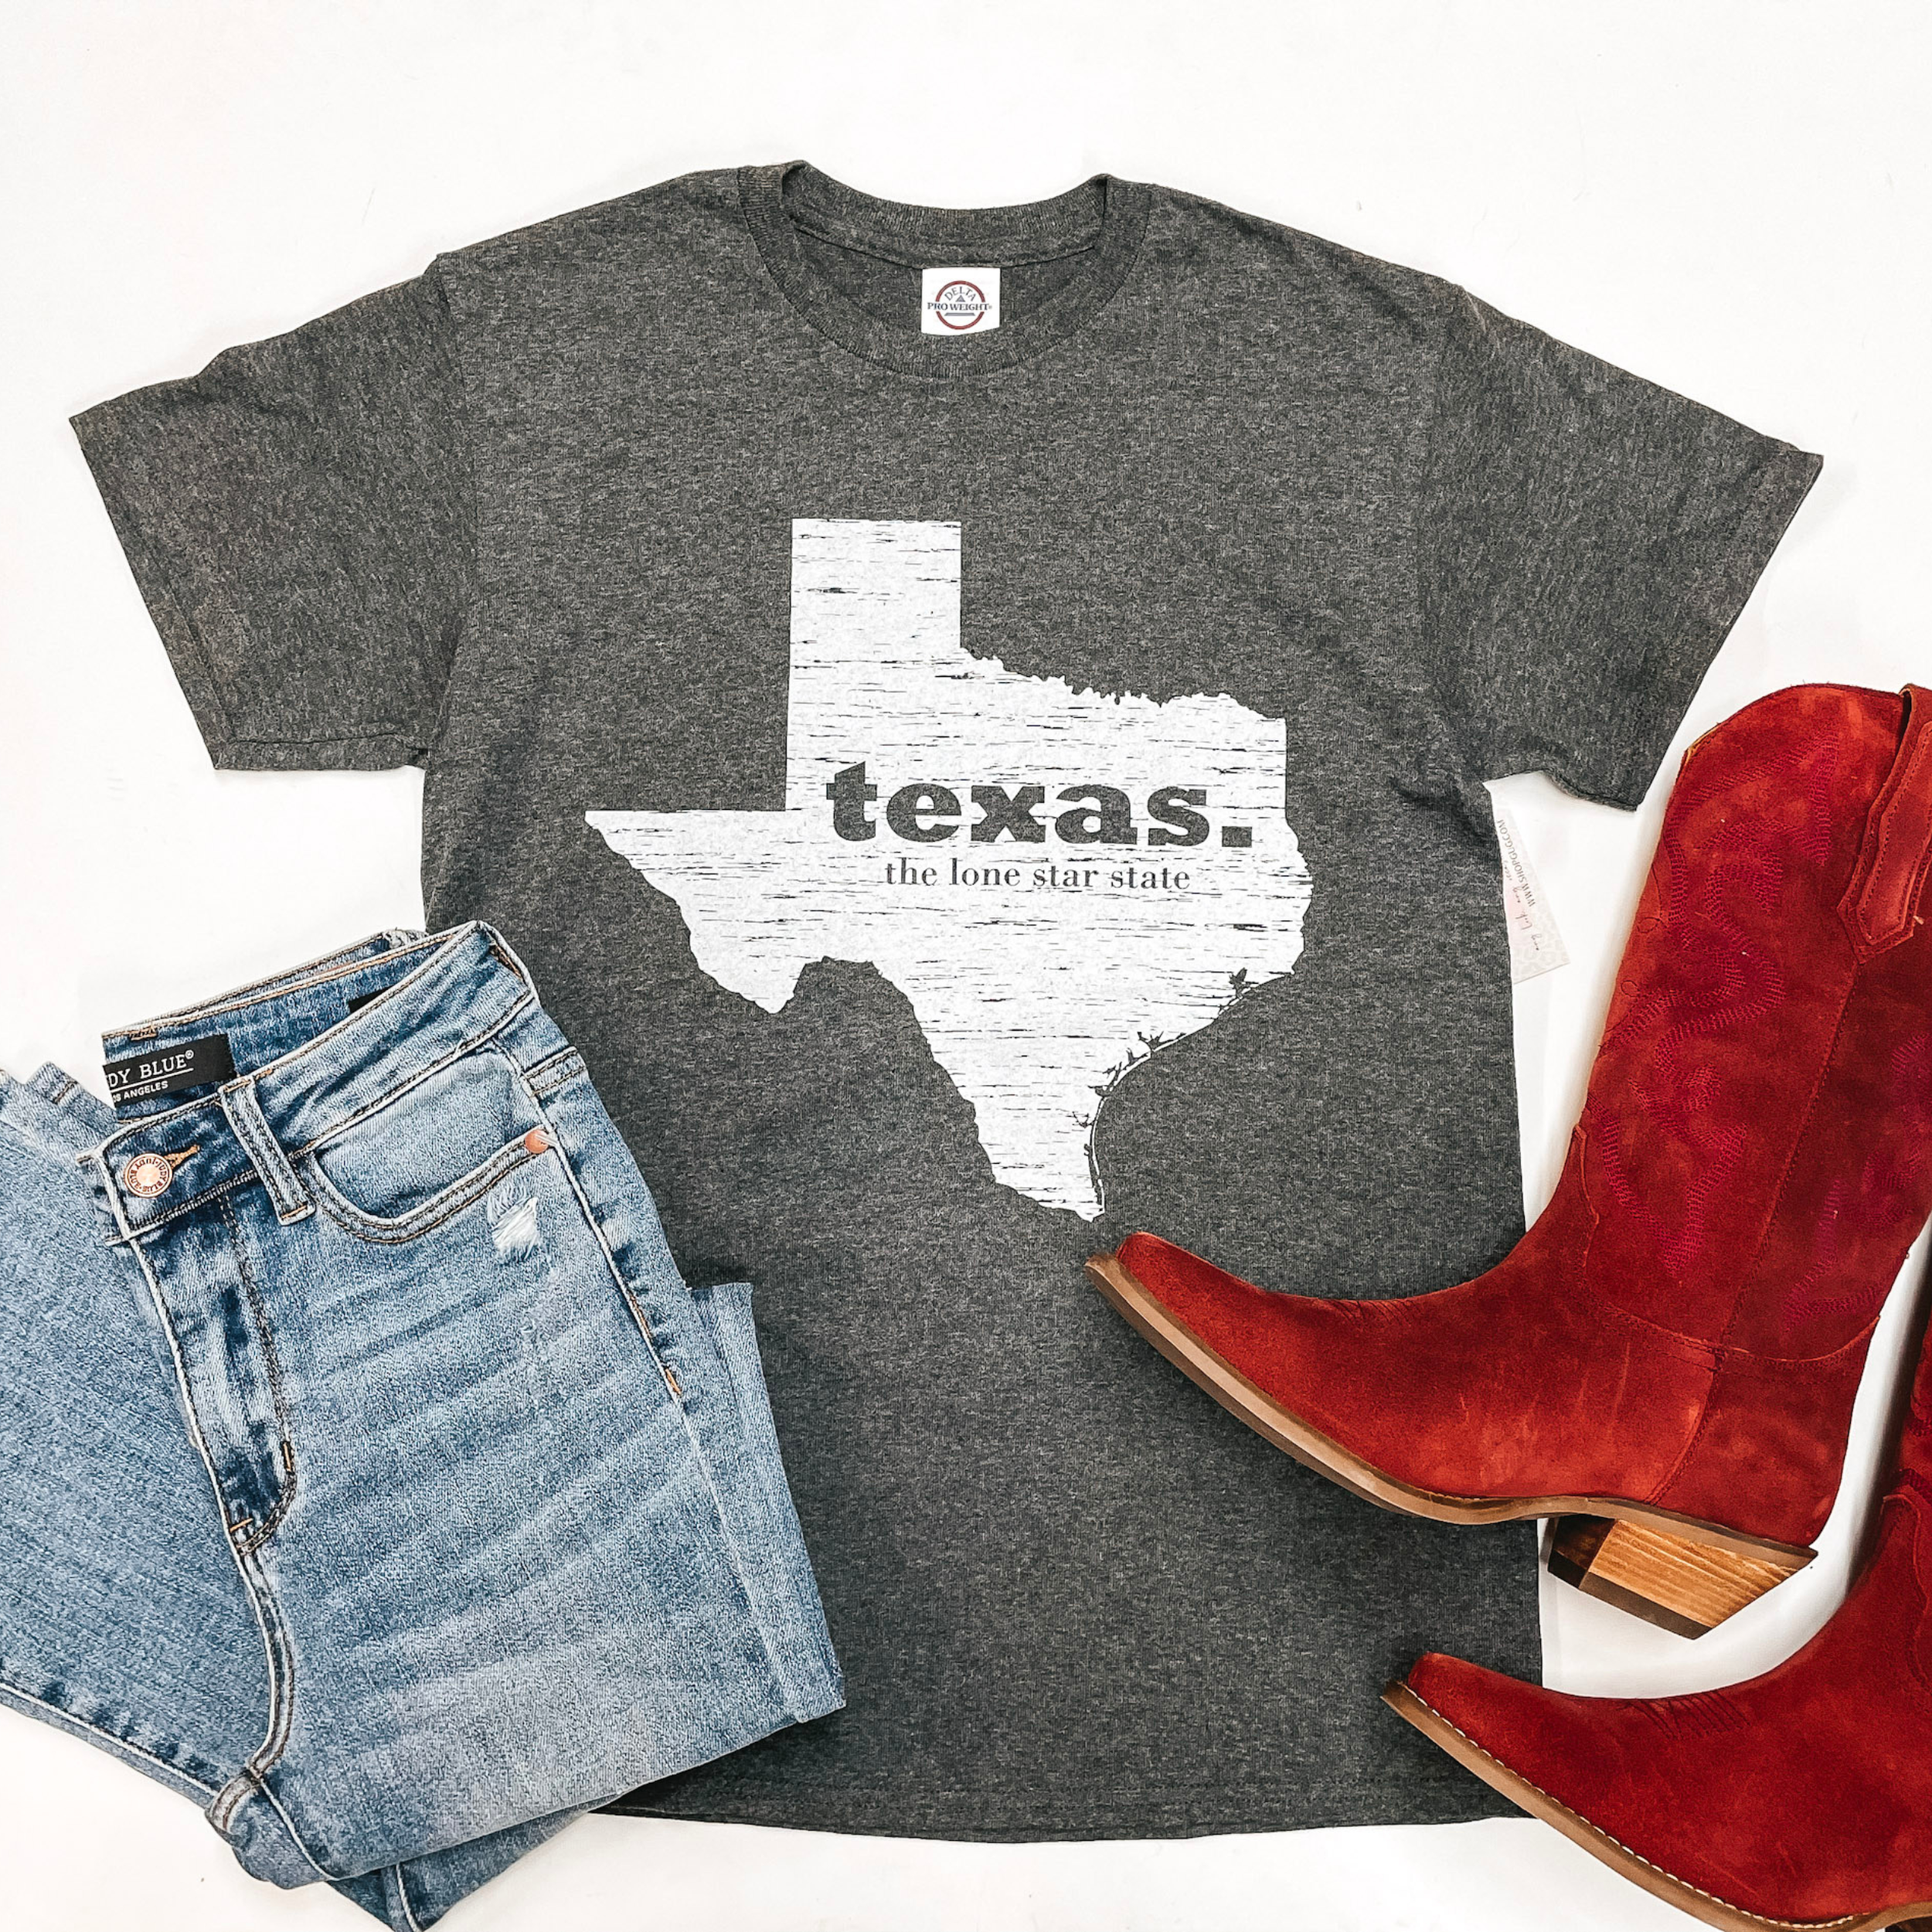 A gray tee is in the middle of the picture on a white background. In the center of the tee is a Texas with block letters saying "texas. the lone star state'" On the bottom left of the picture is light-wash jeans and on tthe bottom right of the picture is red boots. 